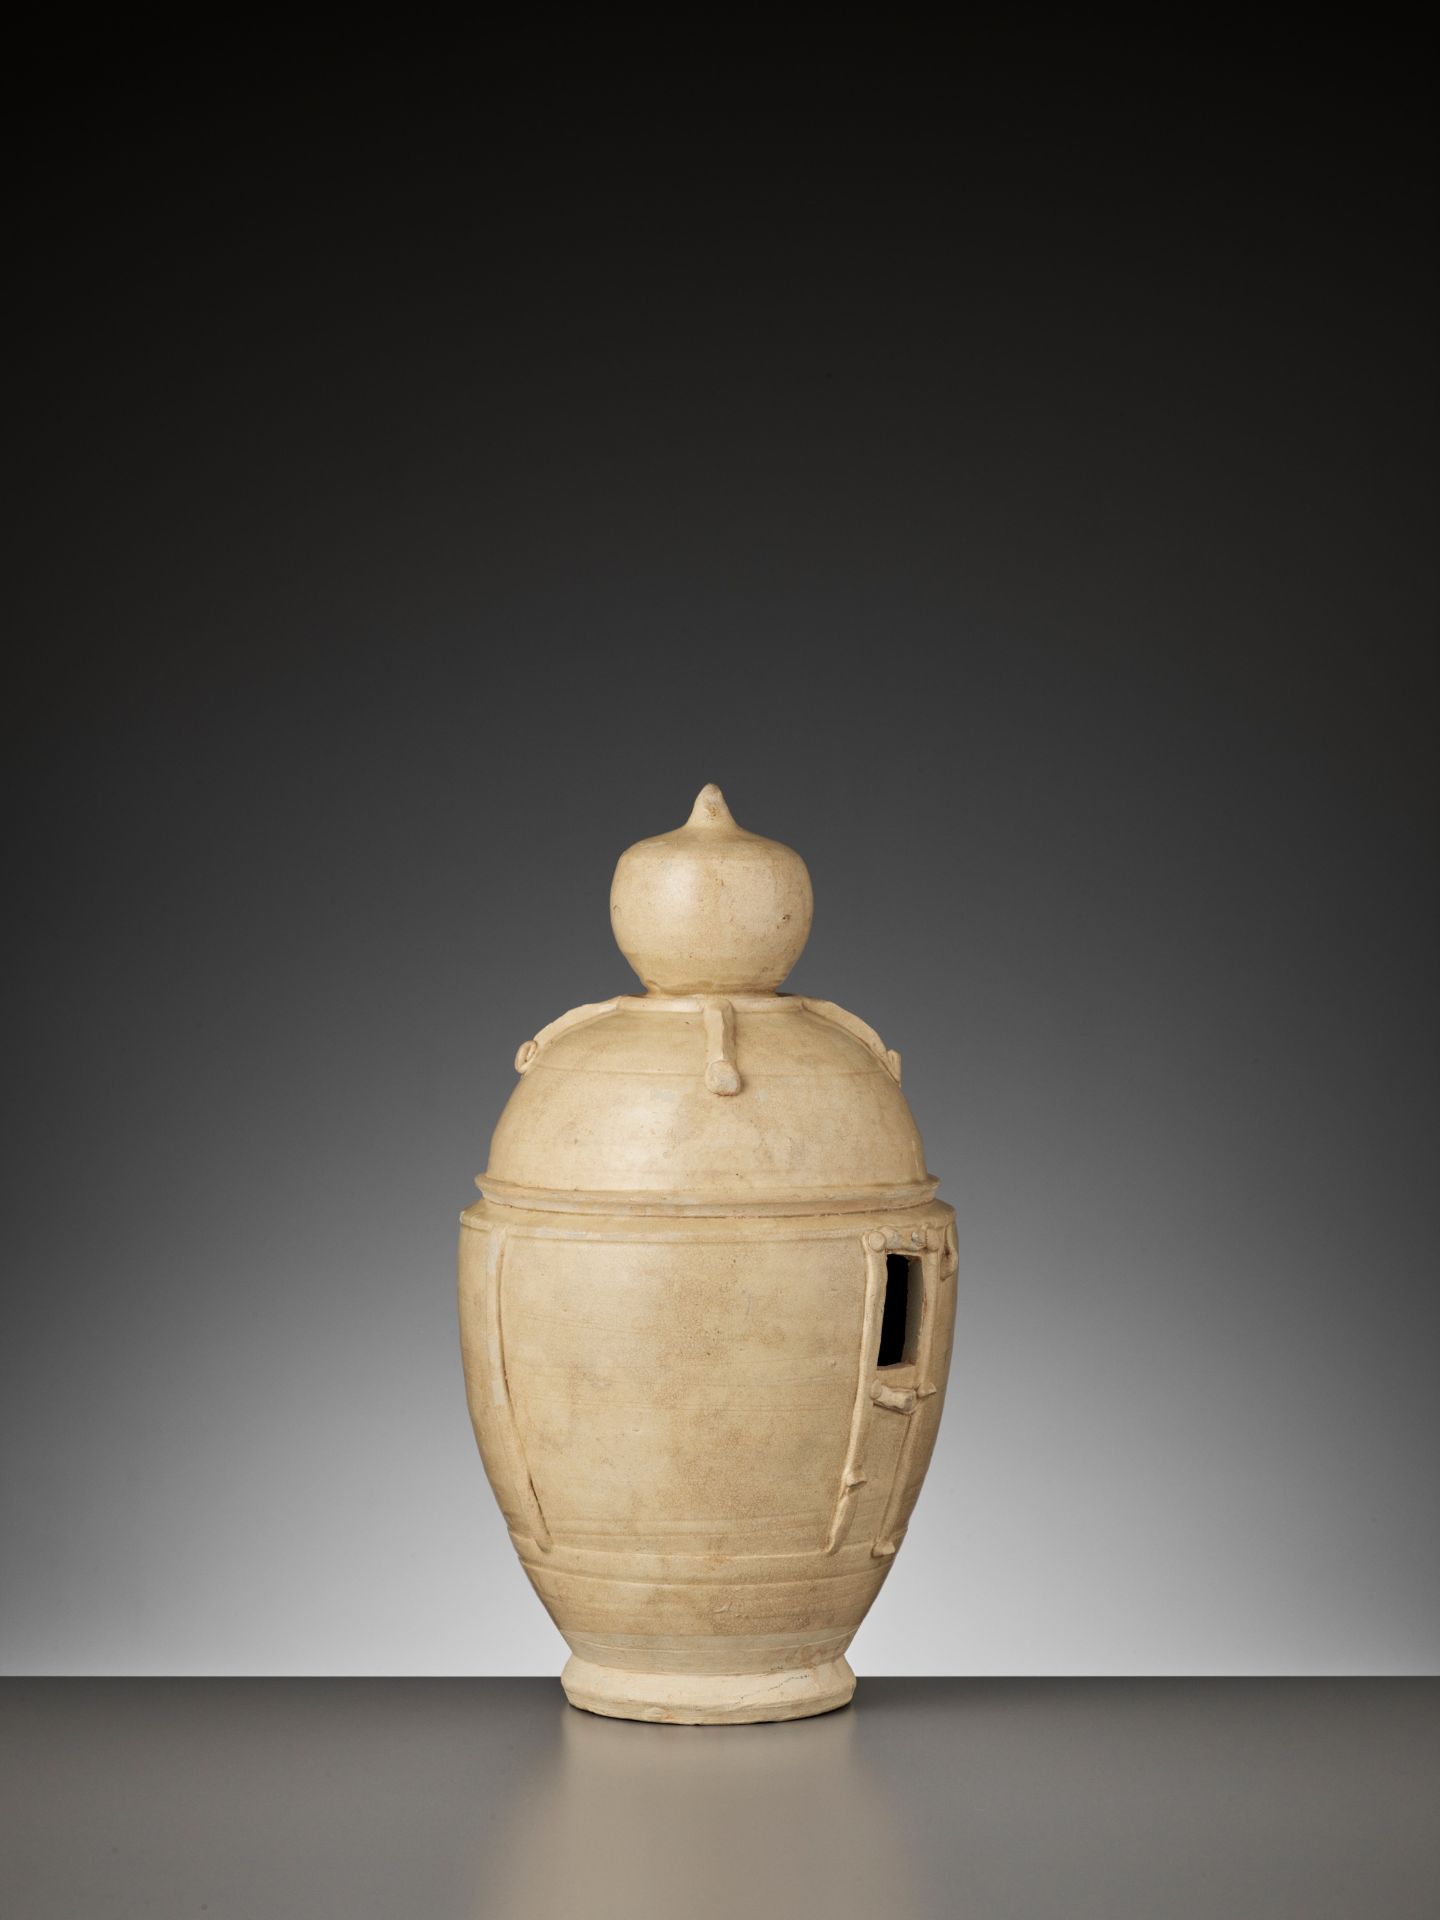 A RARE QINGBAI 'GRANARY' VESSEL, SOUTHERN SONG TO YUAN DYNASTY - Image 6 of 8